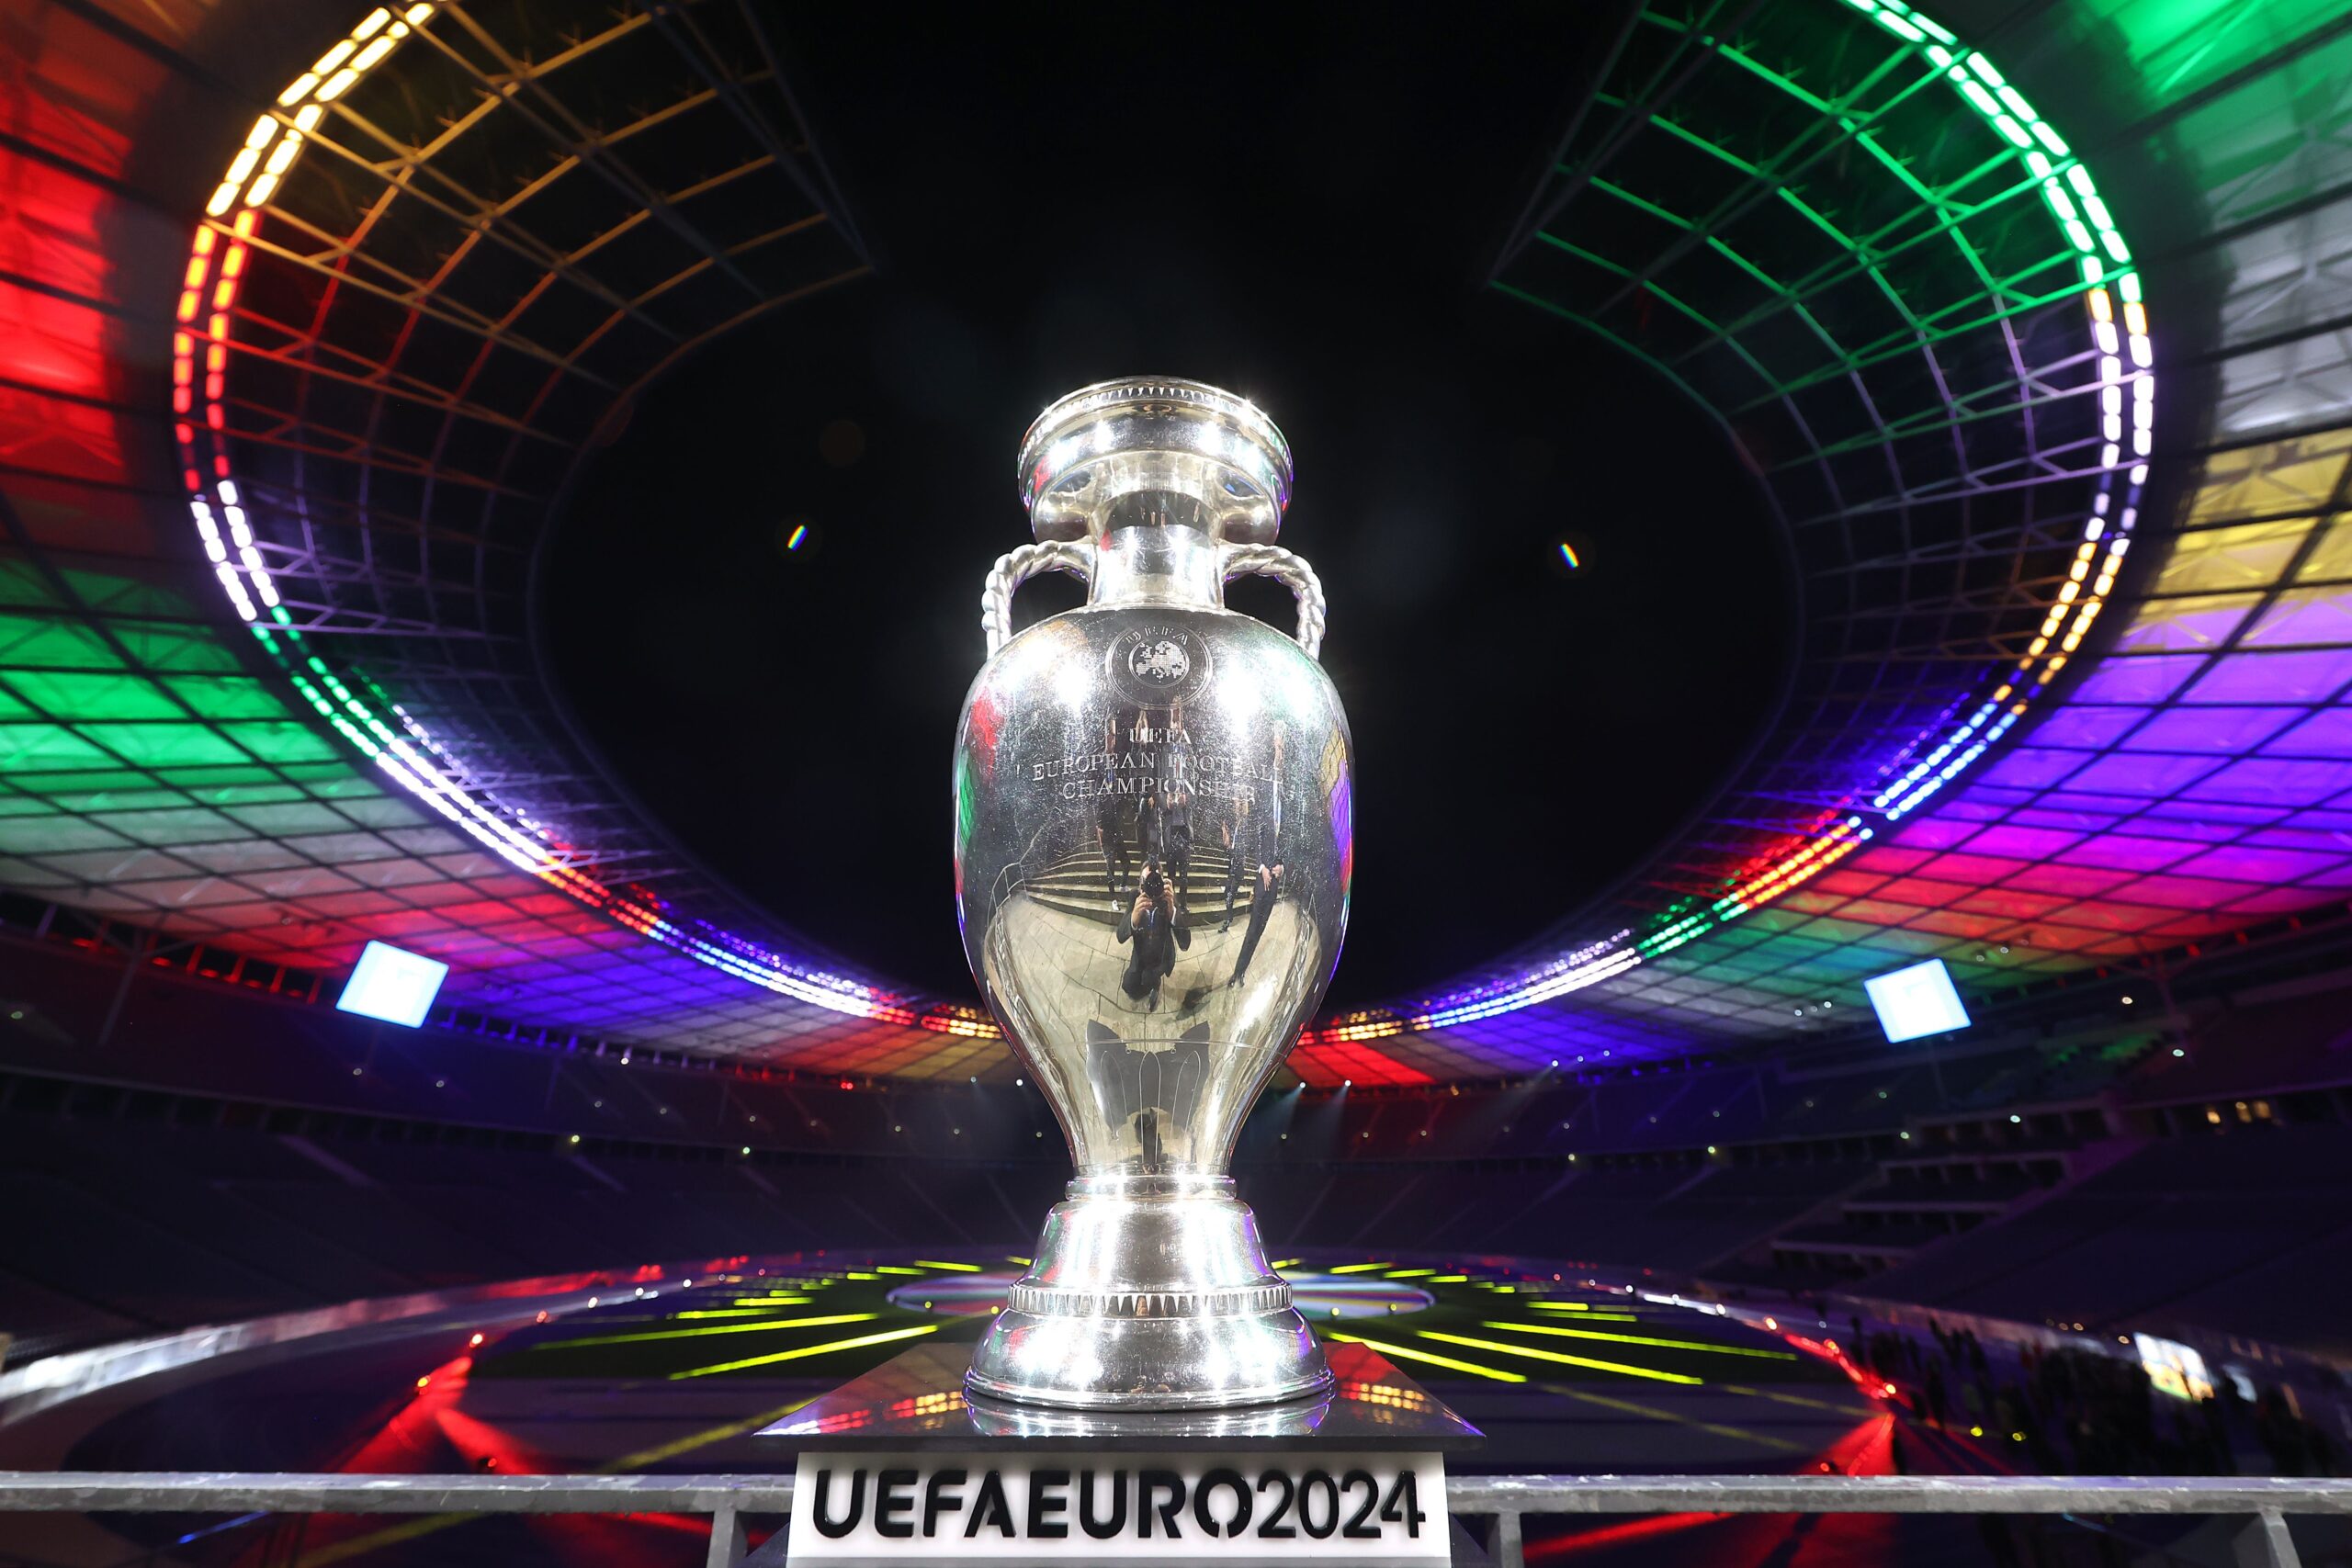 The UEFA EURO 2024 Winners Trophy is pictured duirng the UEFA EURO 2024 Brand Launch at Olympiastadion on October 05, 2021 in Berlin, Germany.